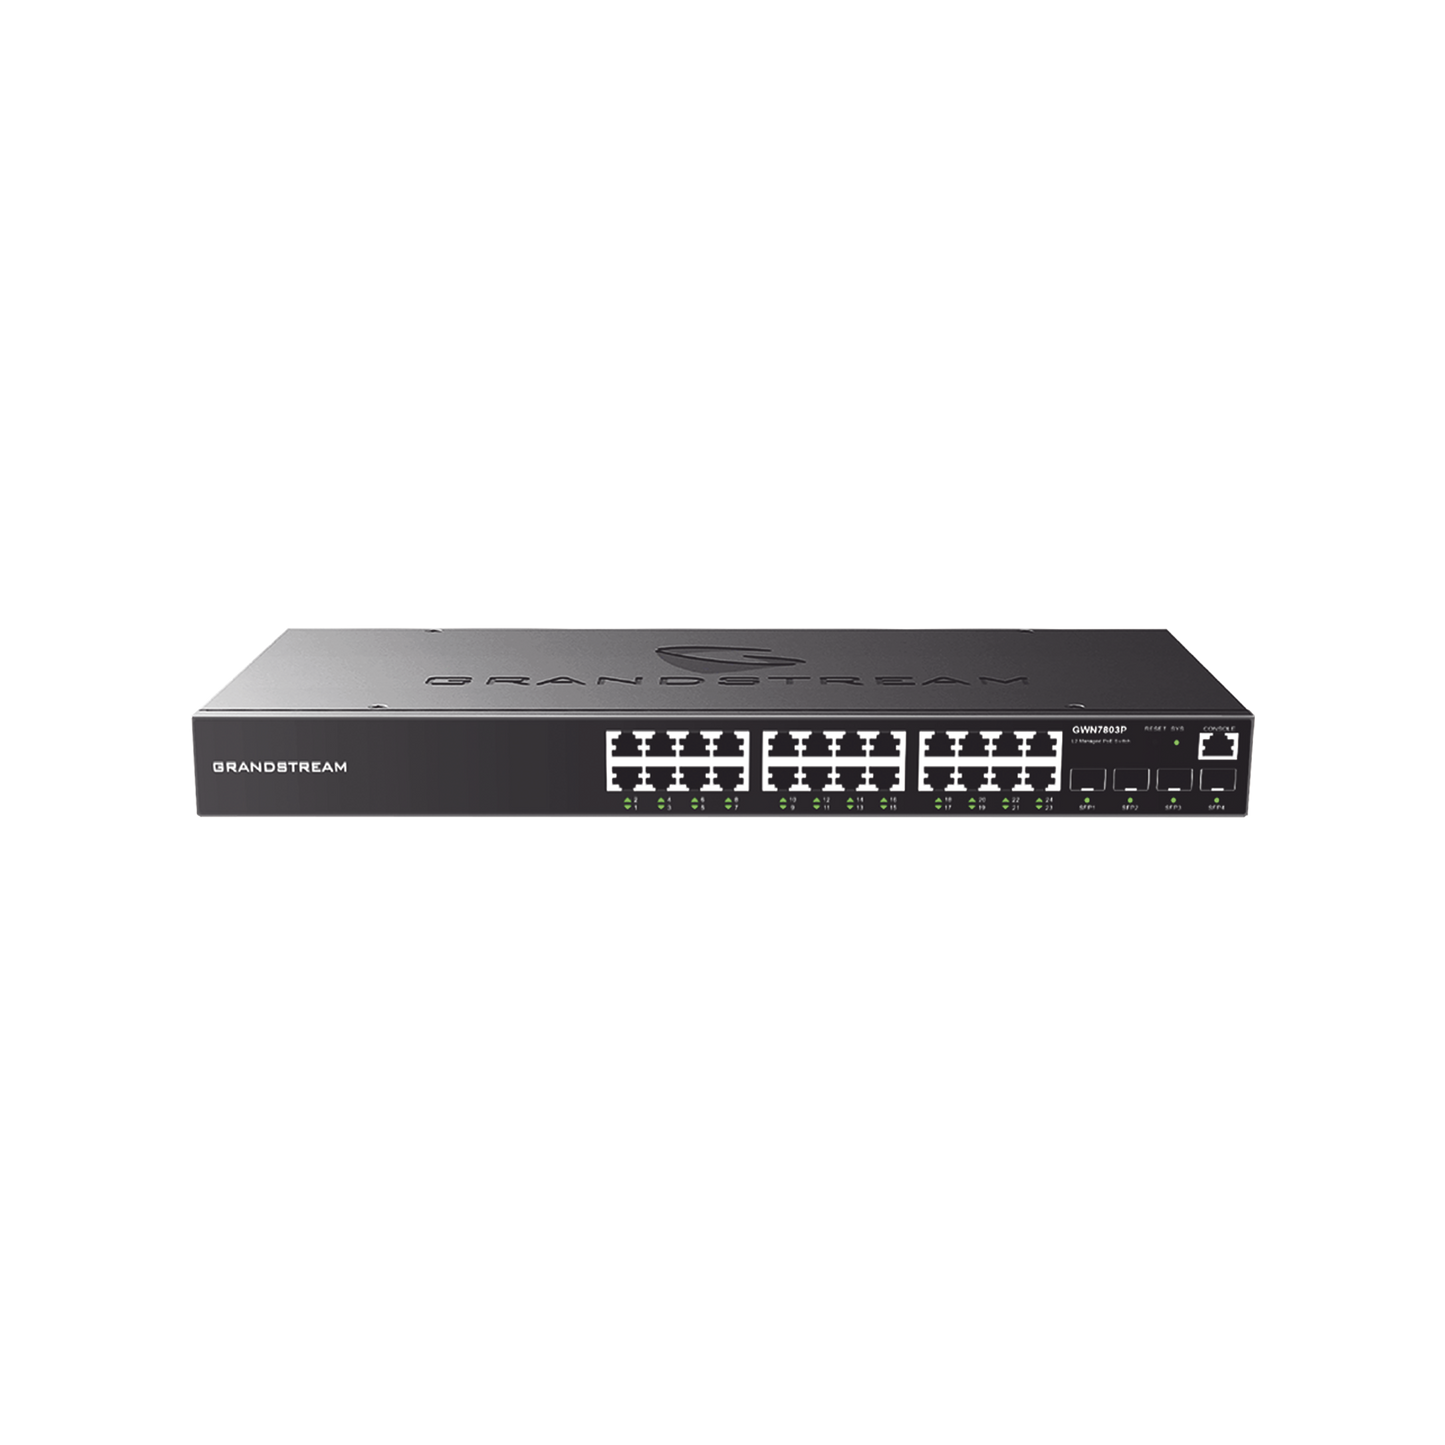 Managed Gigabit PoE+ Switch / 24 ports 10/100/1000 Mbps + 4 SFP Uplink Ports / Up to 360W / Compatible with GWN Cloud.